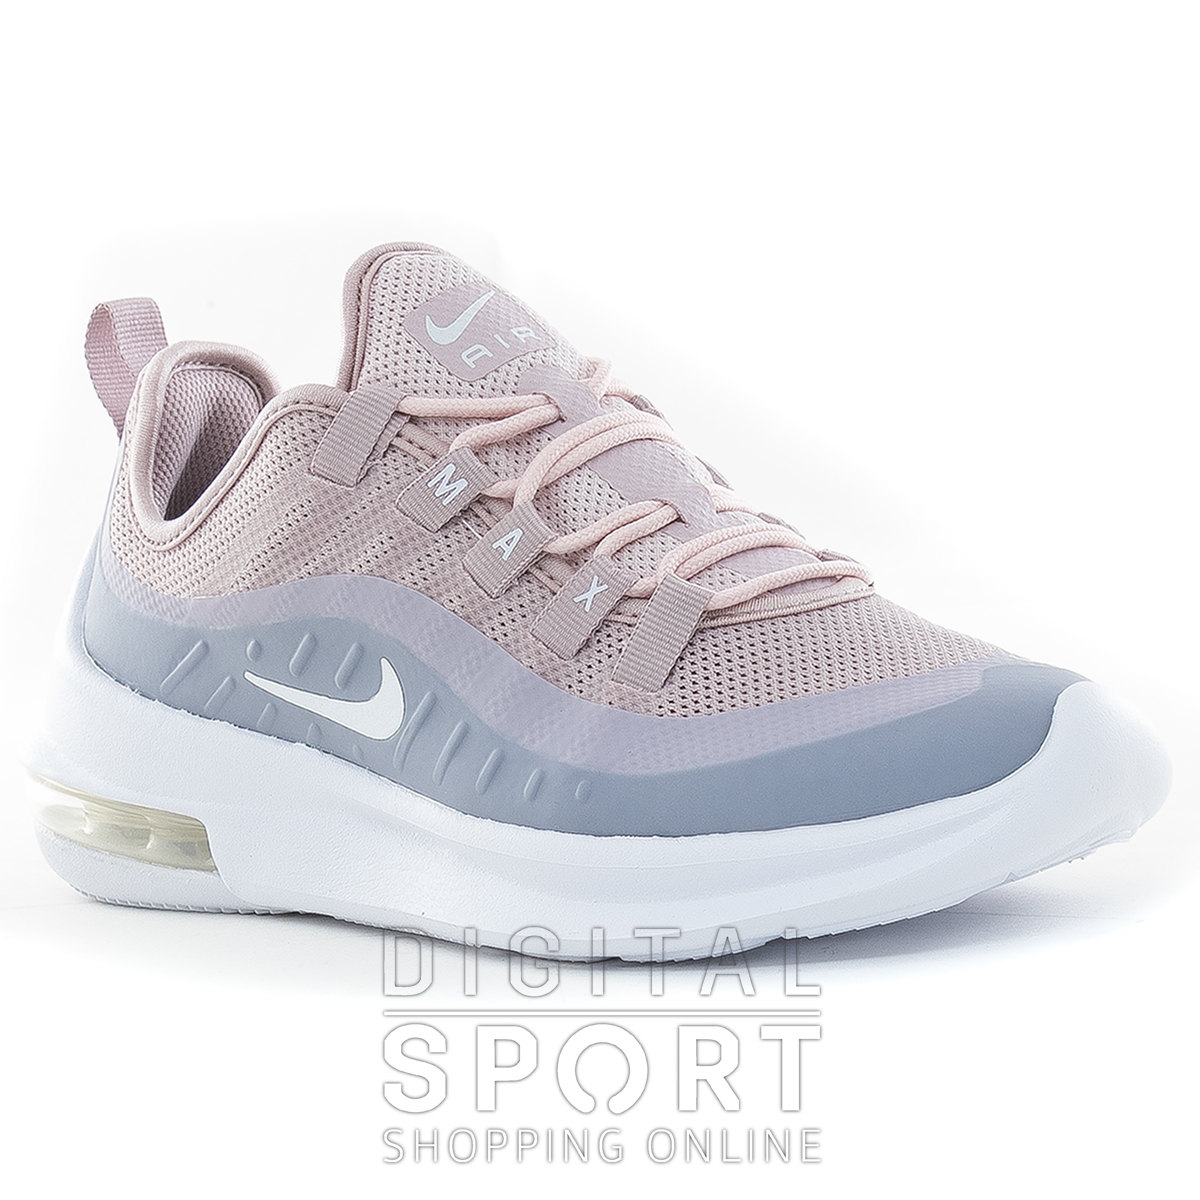 Zapatillas Nike 2019 Mujer, Buy Now, Flash Sales, 53% OFF,  www.hillfoundation.org.uk